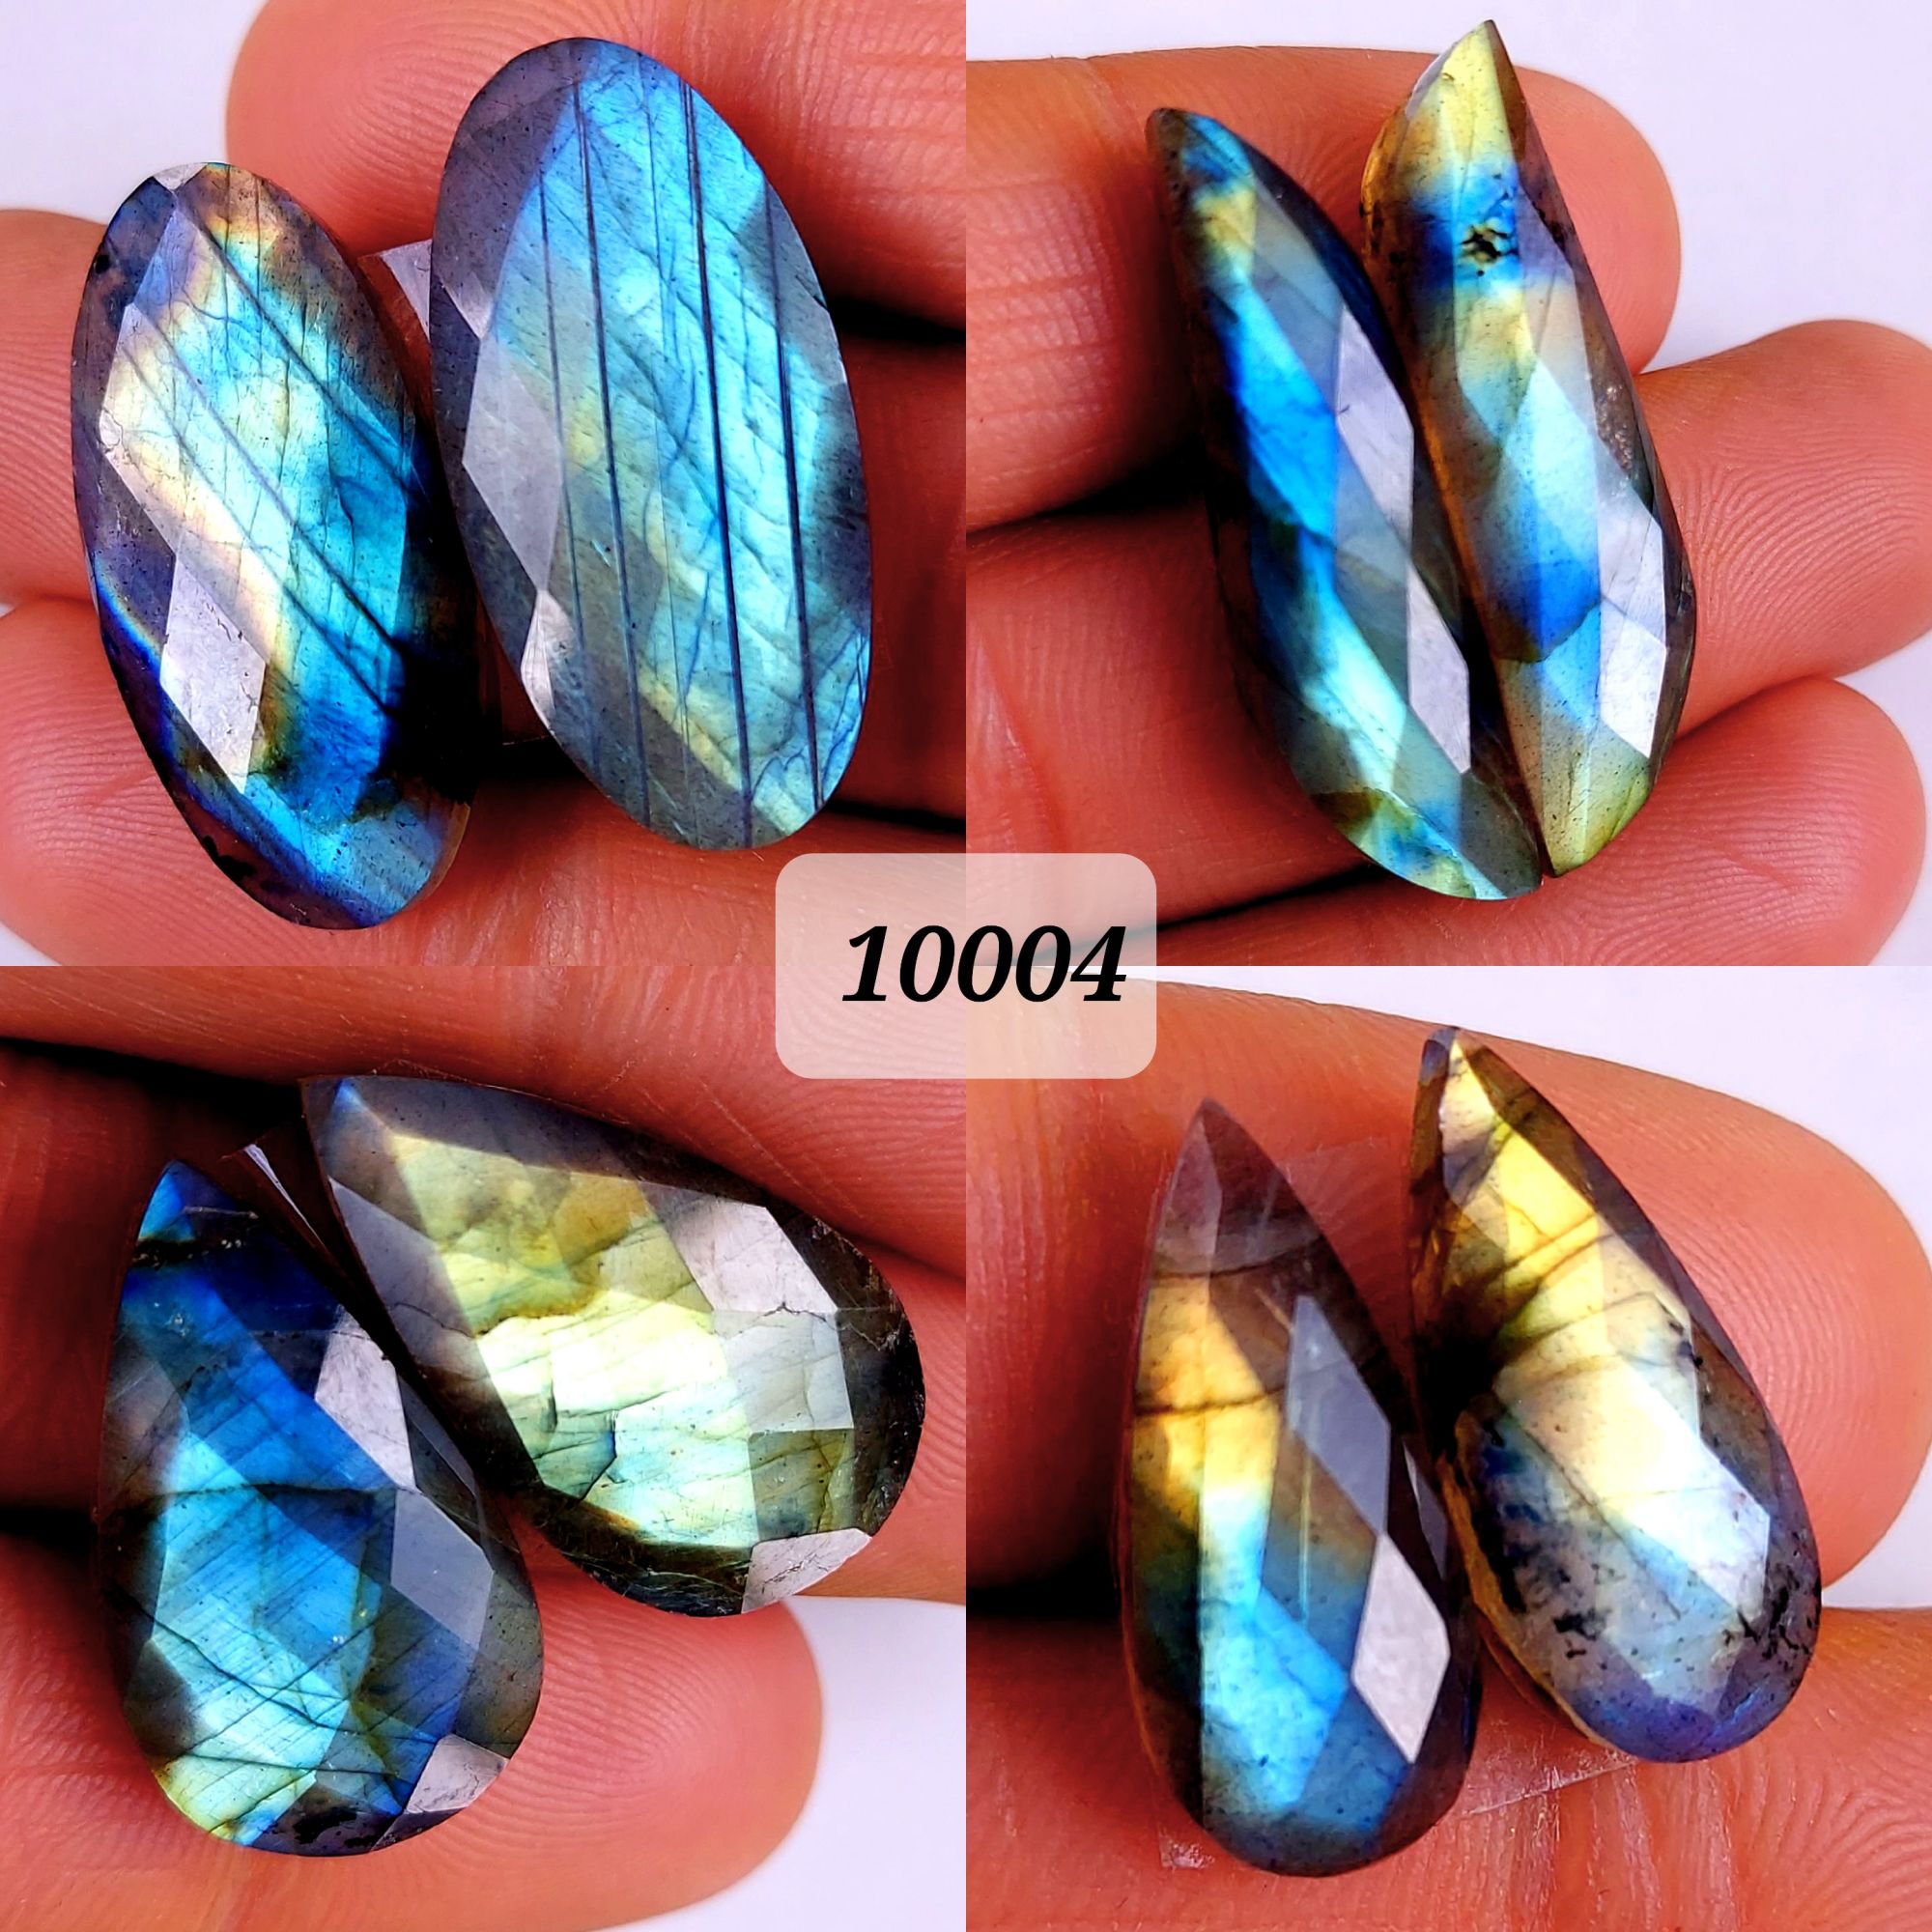 4Pair 115Cts Natural Labradorite Blue Fire Faceted Dangle Drop Earrings Semi Precious Crystal For Hoop Earrings Blue Gemstone Cabochon Matching pair 32x9 20x9mm #10004